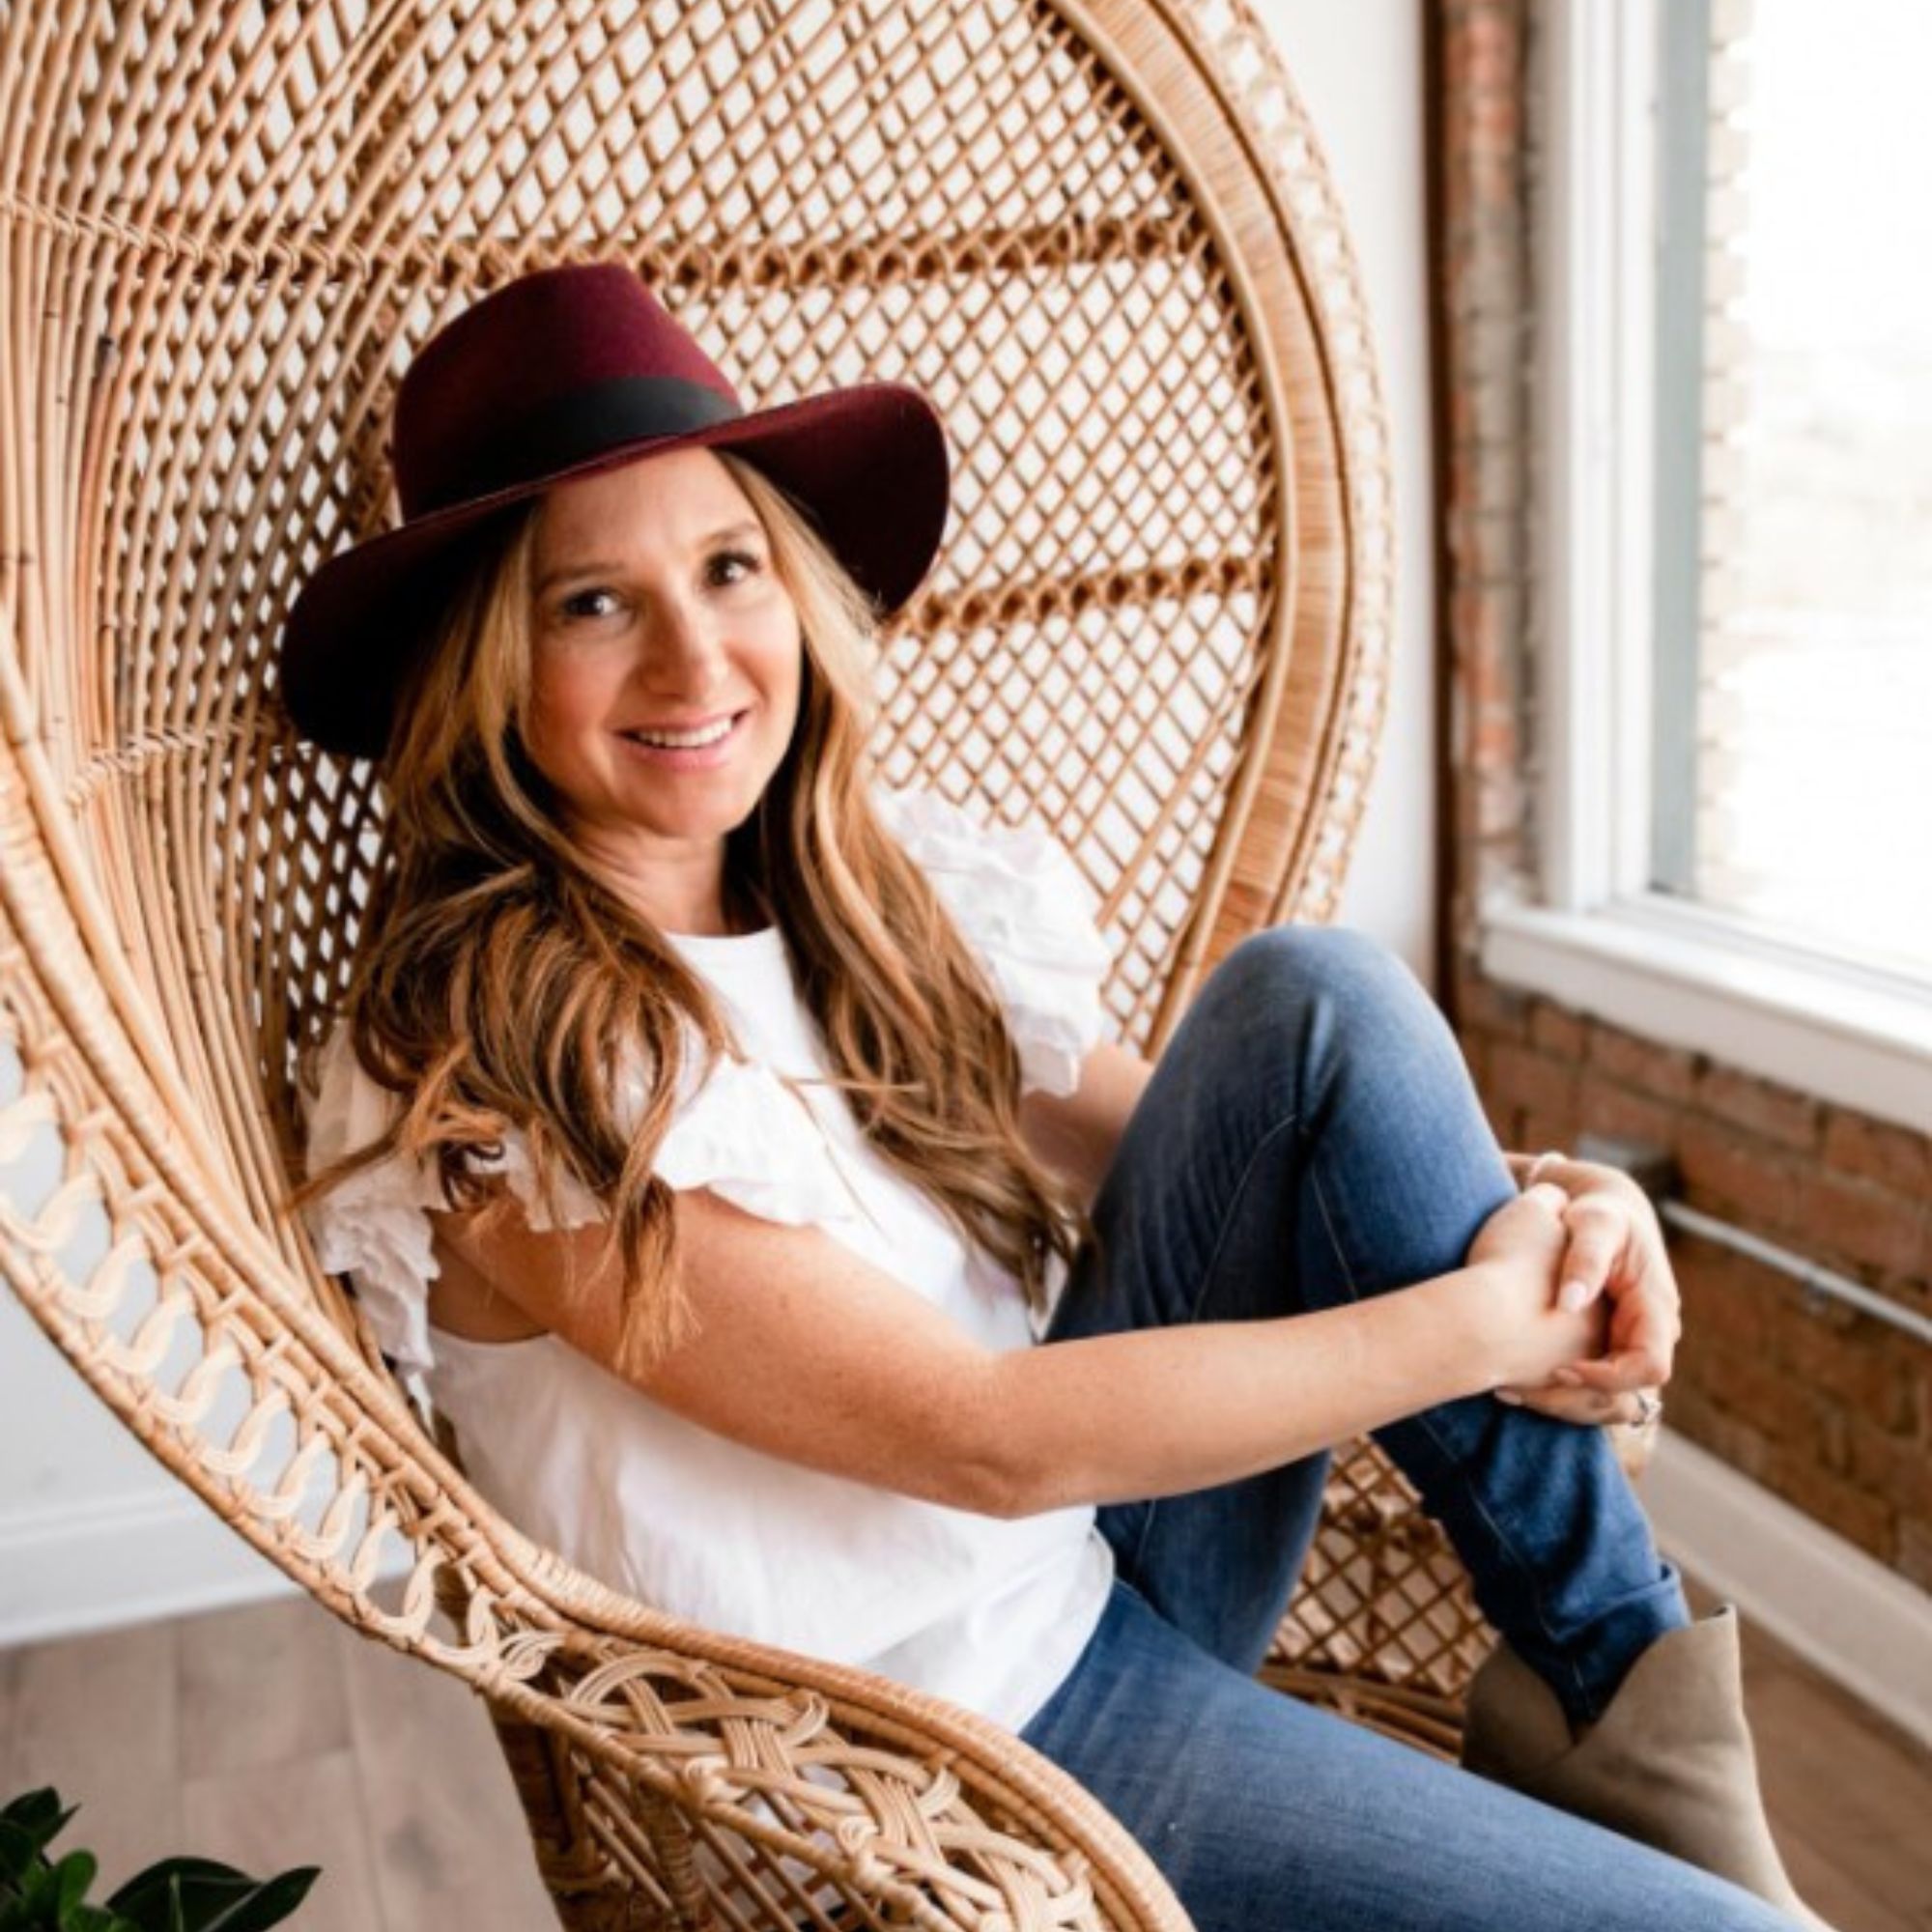 A picture of Daniella Menachemson in a white t-shirt, jeans, and a hat, sitting in a wicker chair